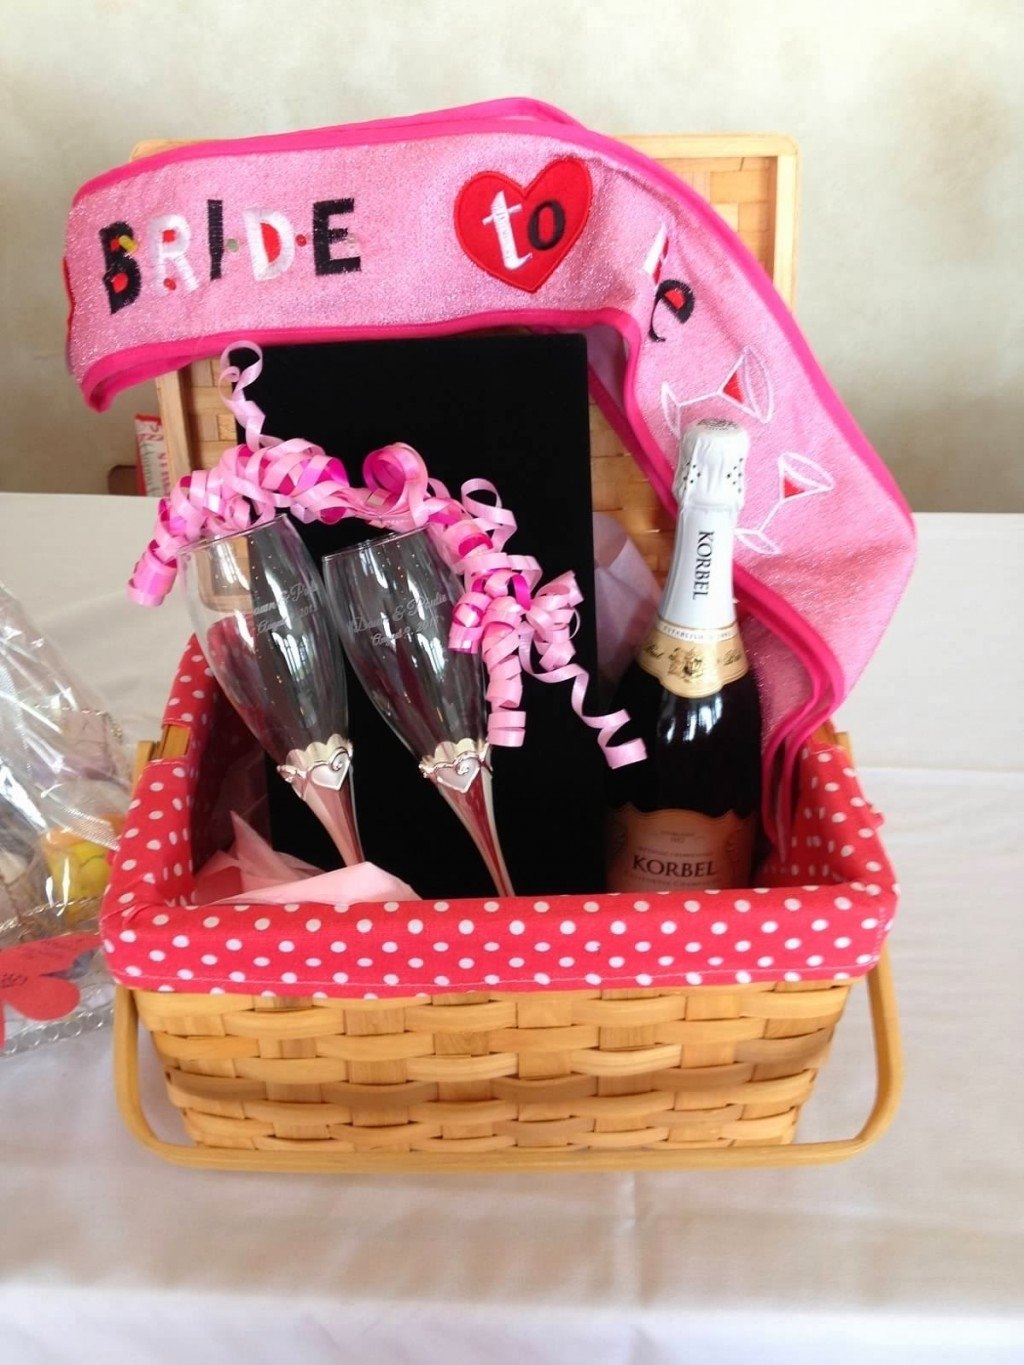 10 Great Bridal Shower Gifts Ideas For The Bride creative word as bridal shower gift ideas http paulamclain 5 2022